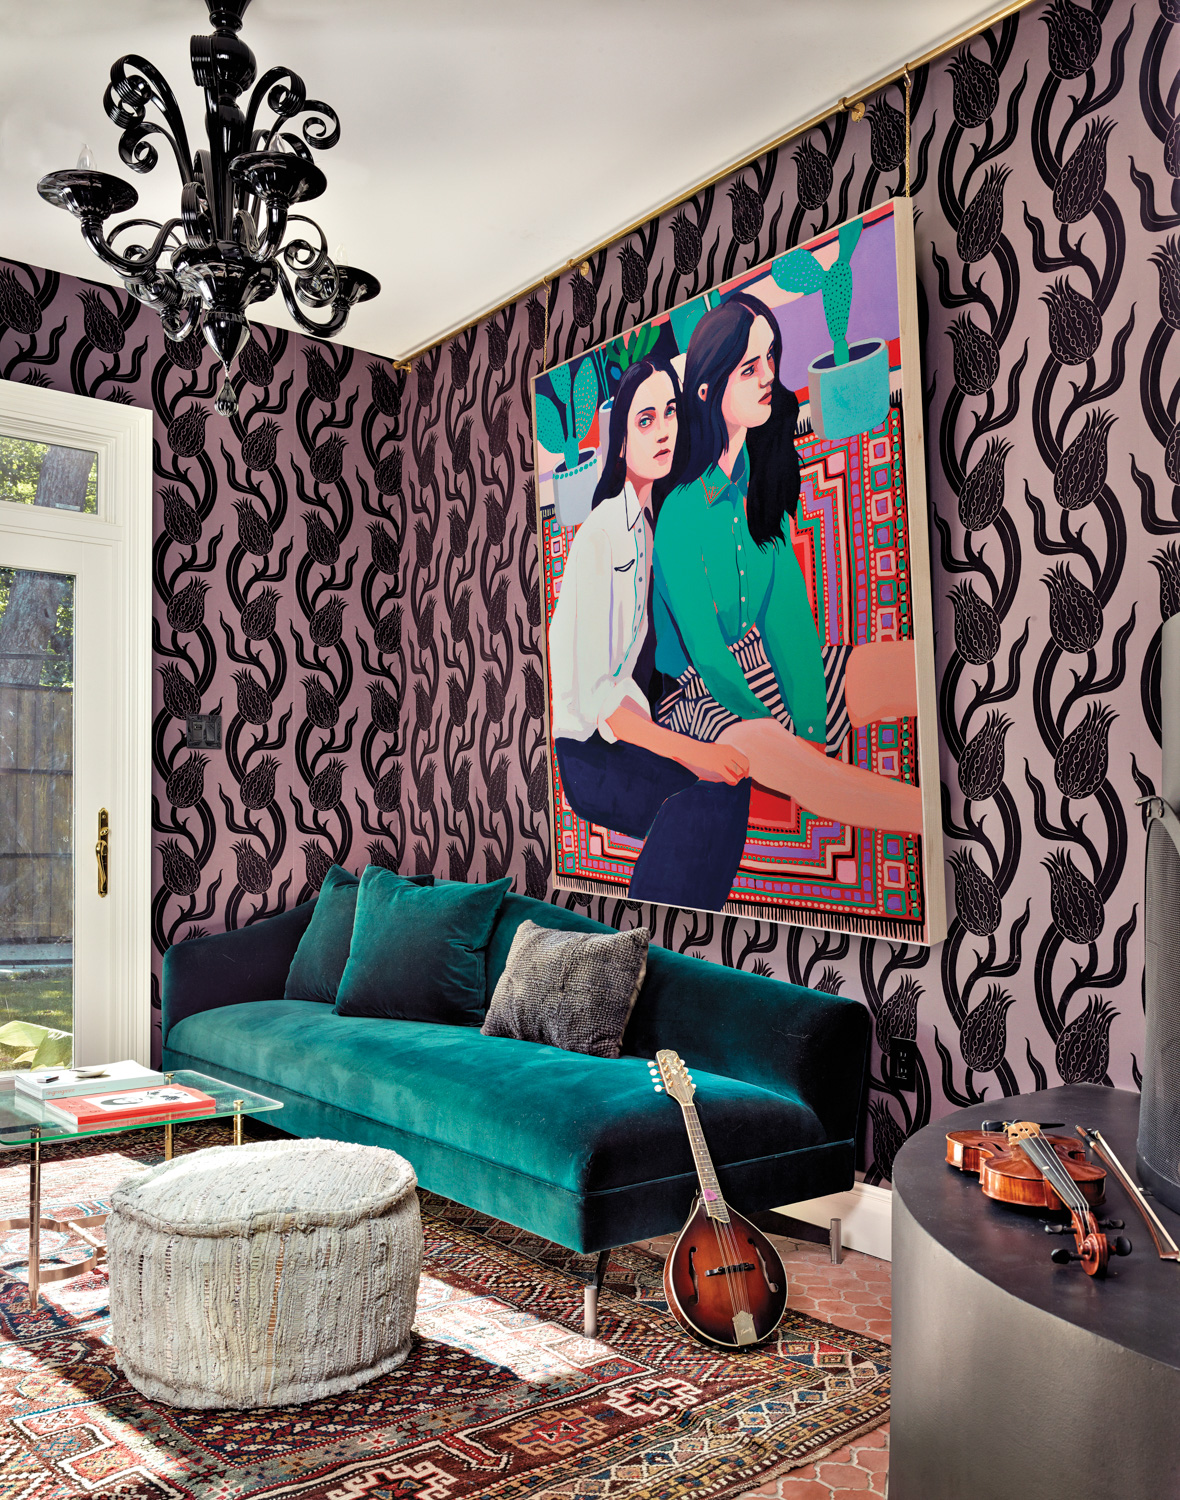 Living room with a large-scale painting of 2 women against boldly patterned wallpaper above a teal-velvet couch.